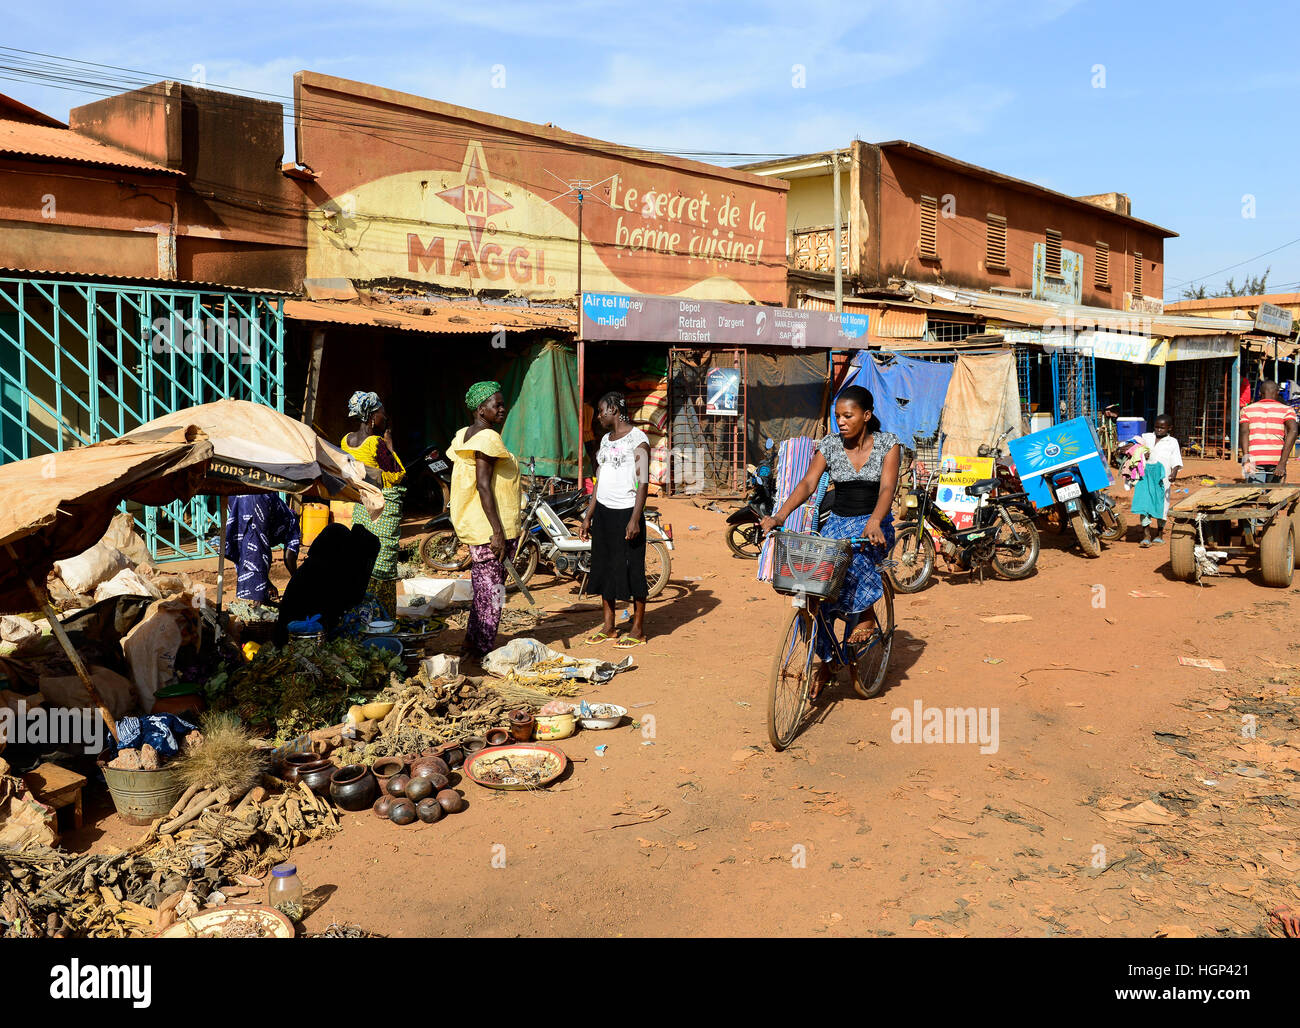 BURKINA FASO , Boulkiemdé Province, Koudougou, shop with Maggi advertisement, Maggi is a brand of swiss Nestle company, in contrast selling of natural roots and herbs on the road Stock Photo